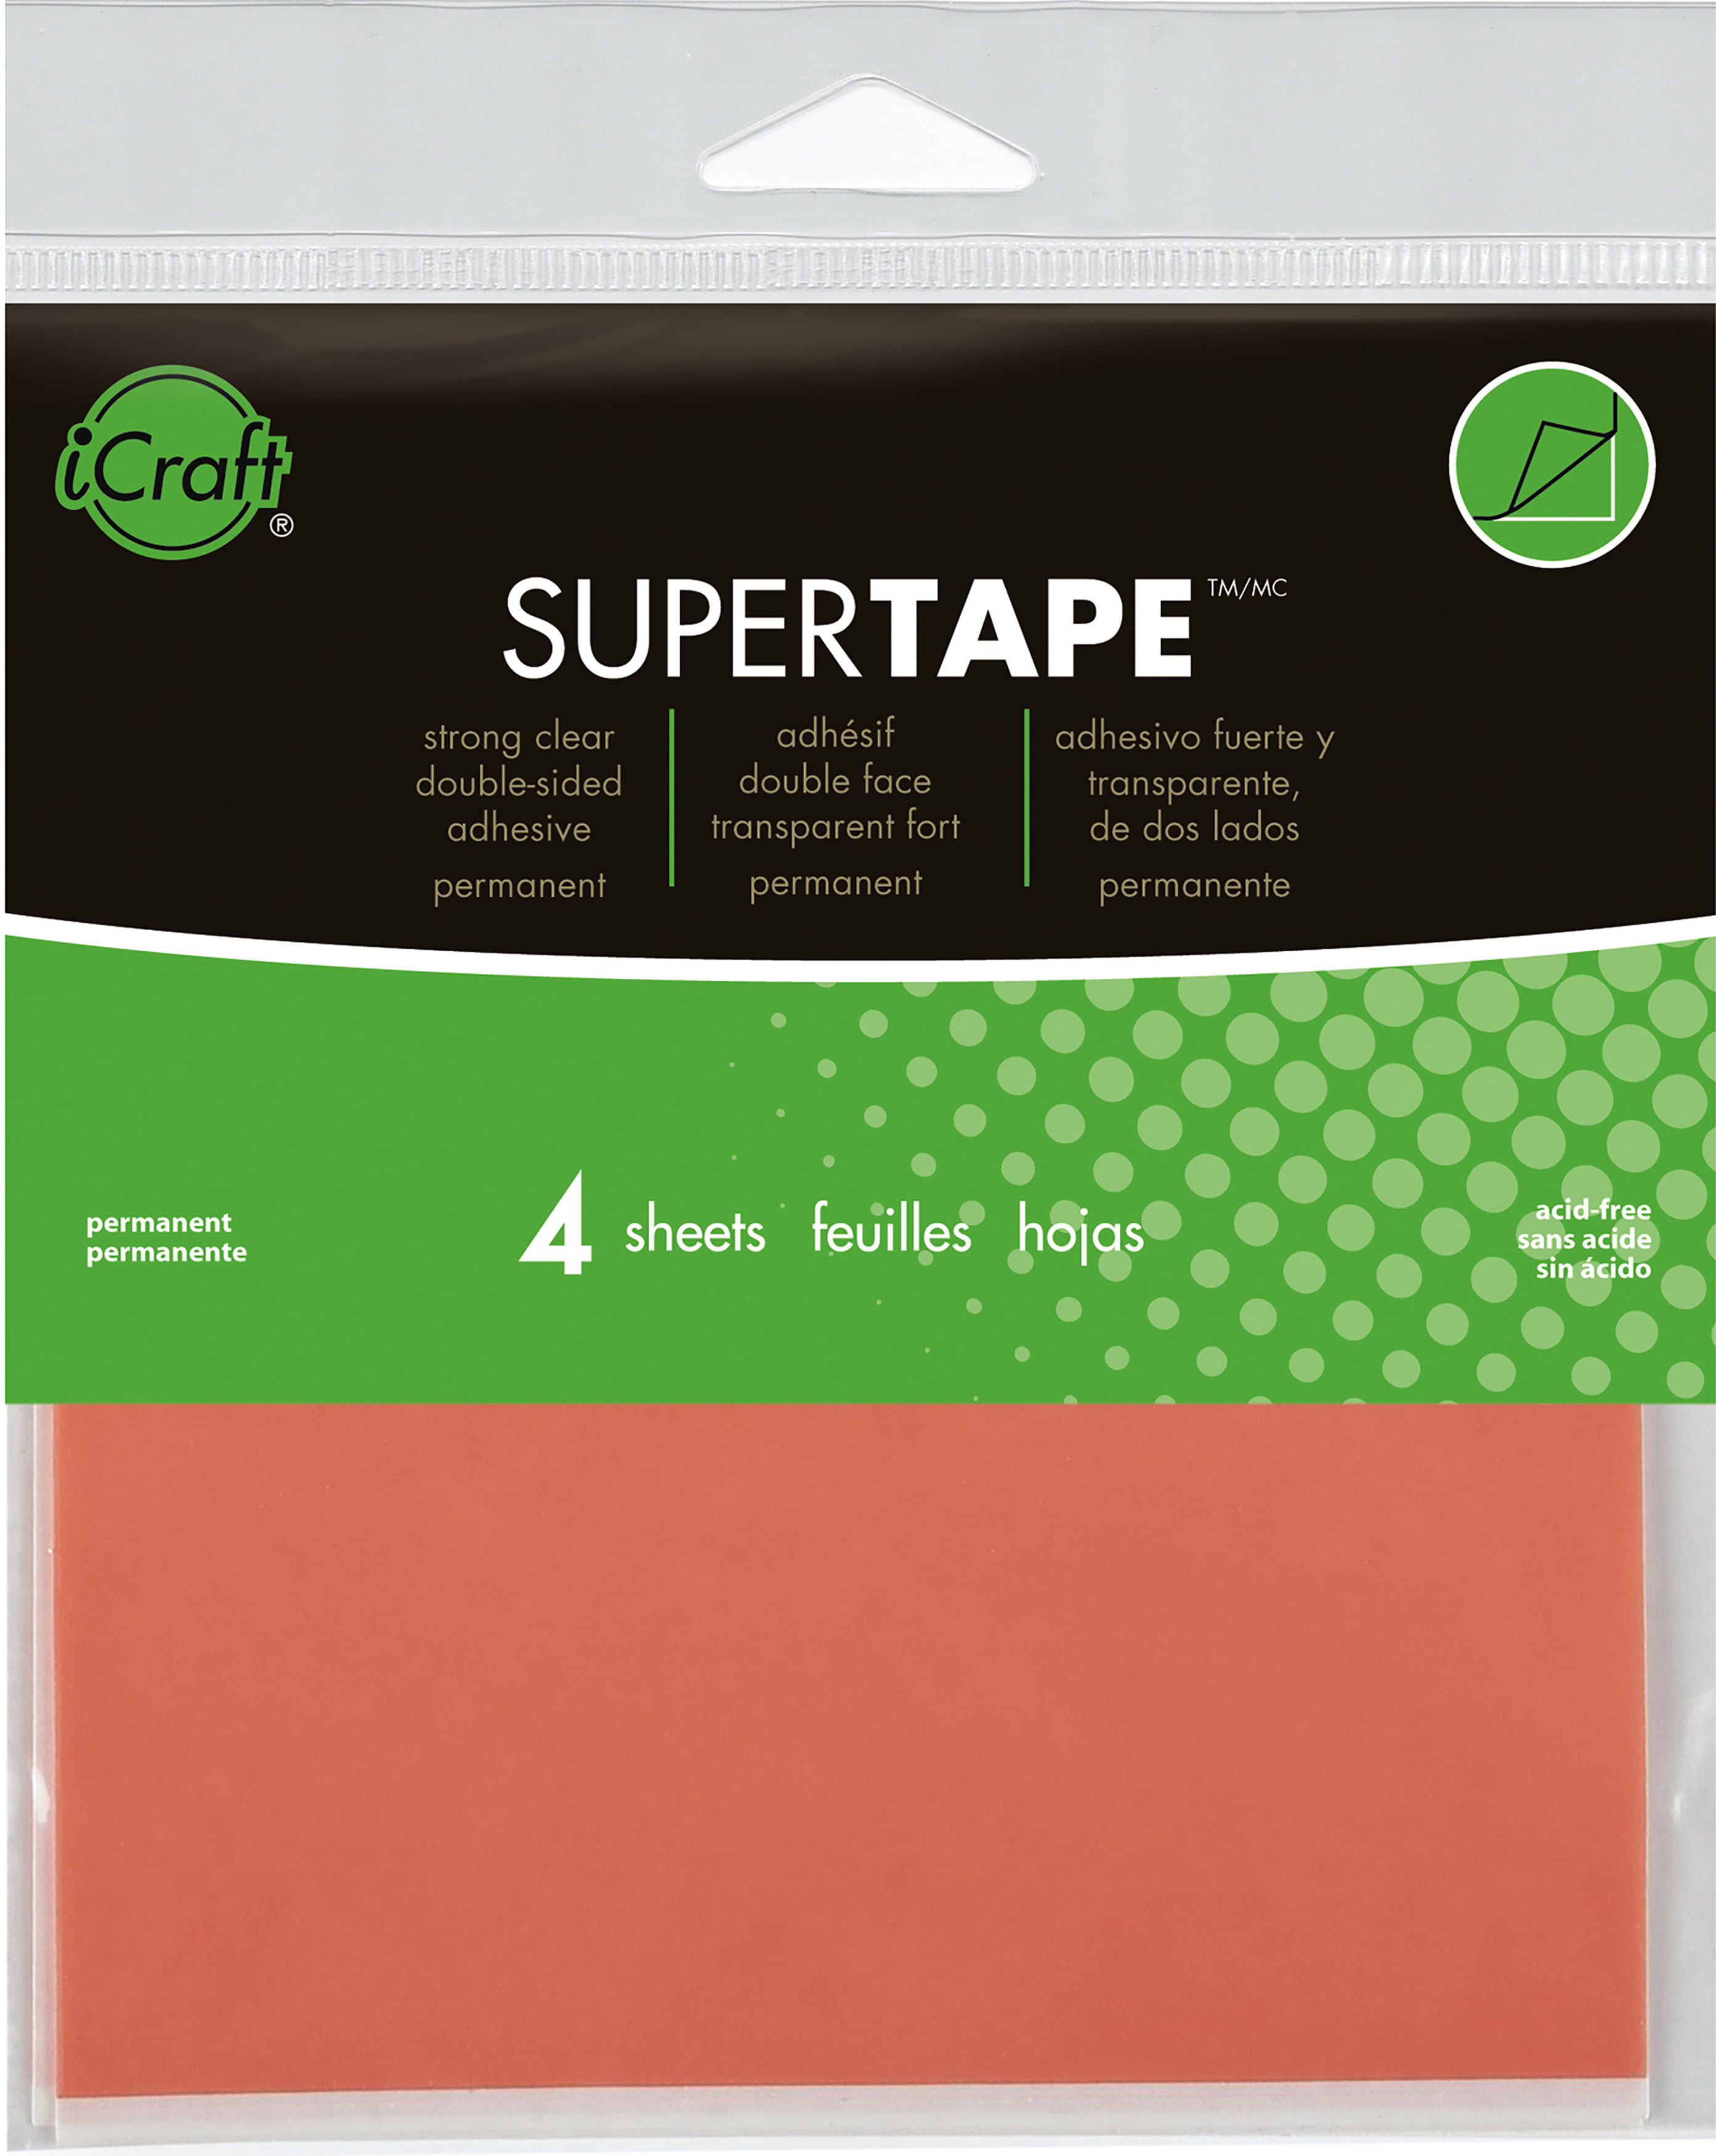  iCraft SuperTape Strong Double Sided Permanent Double